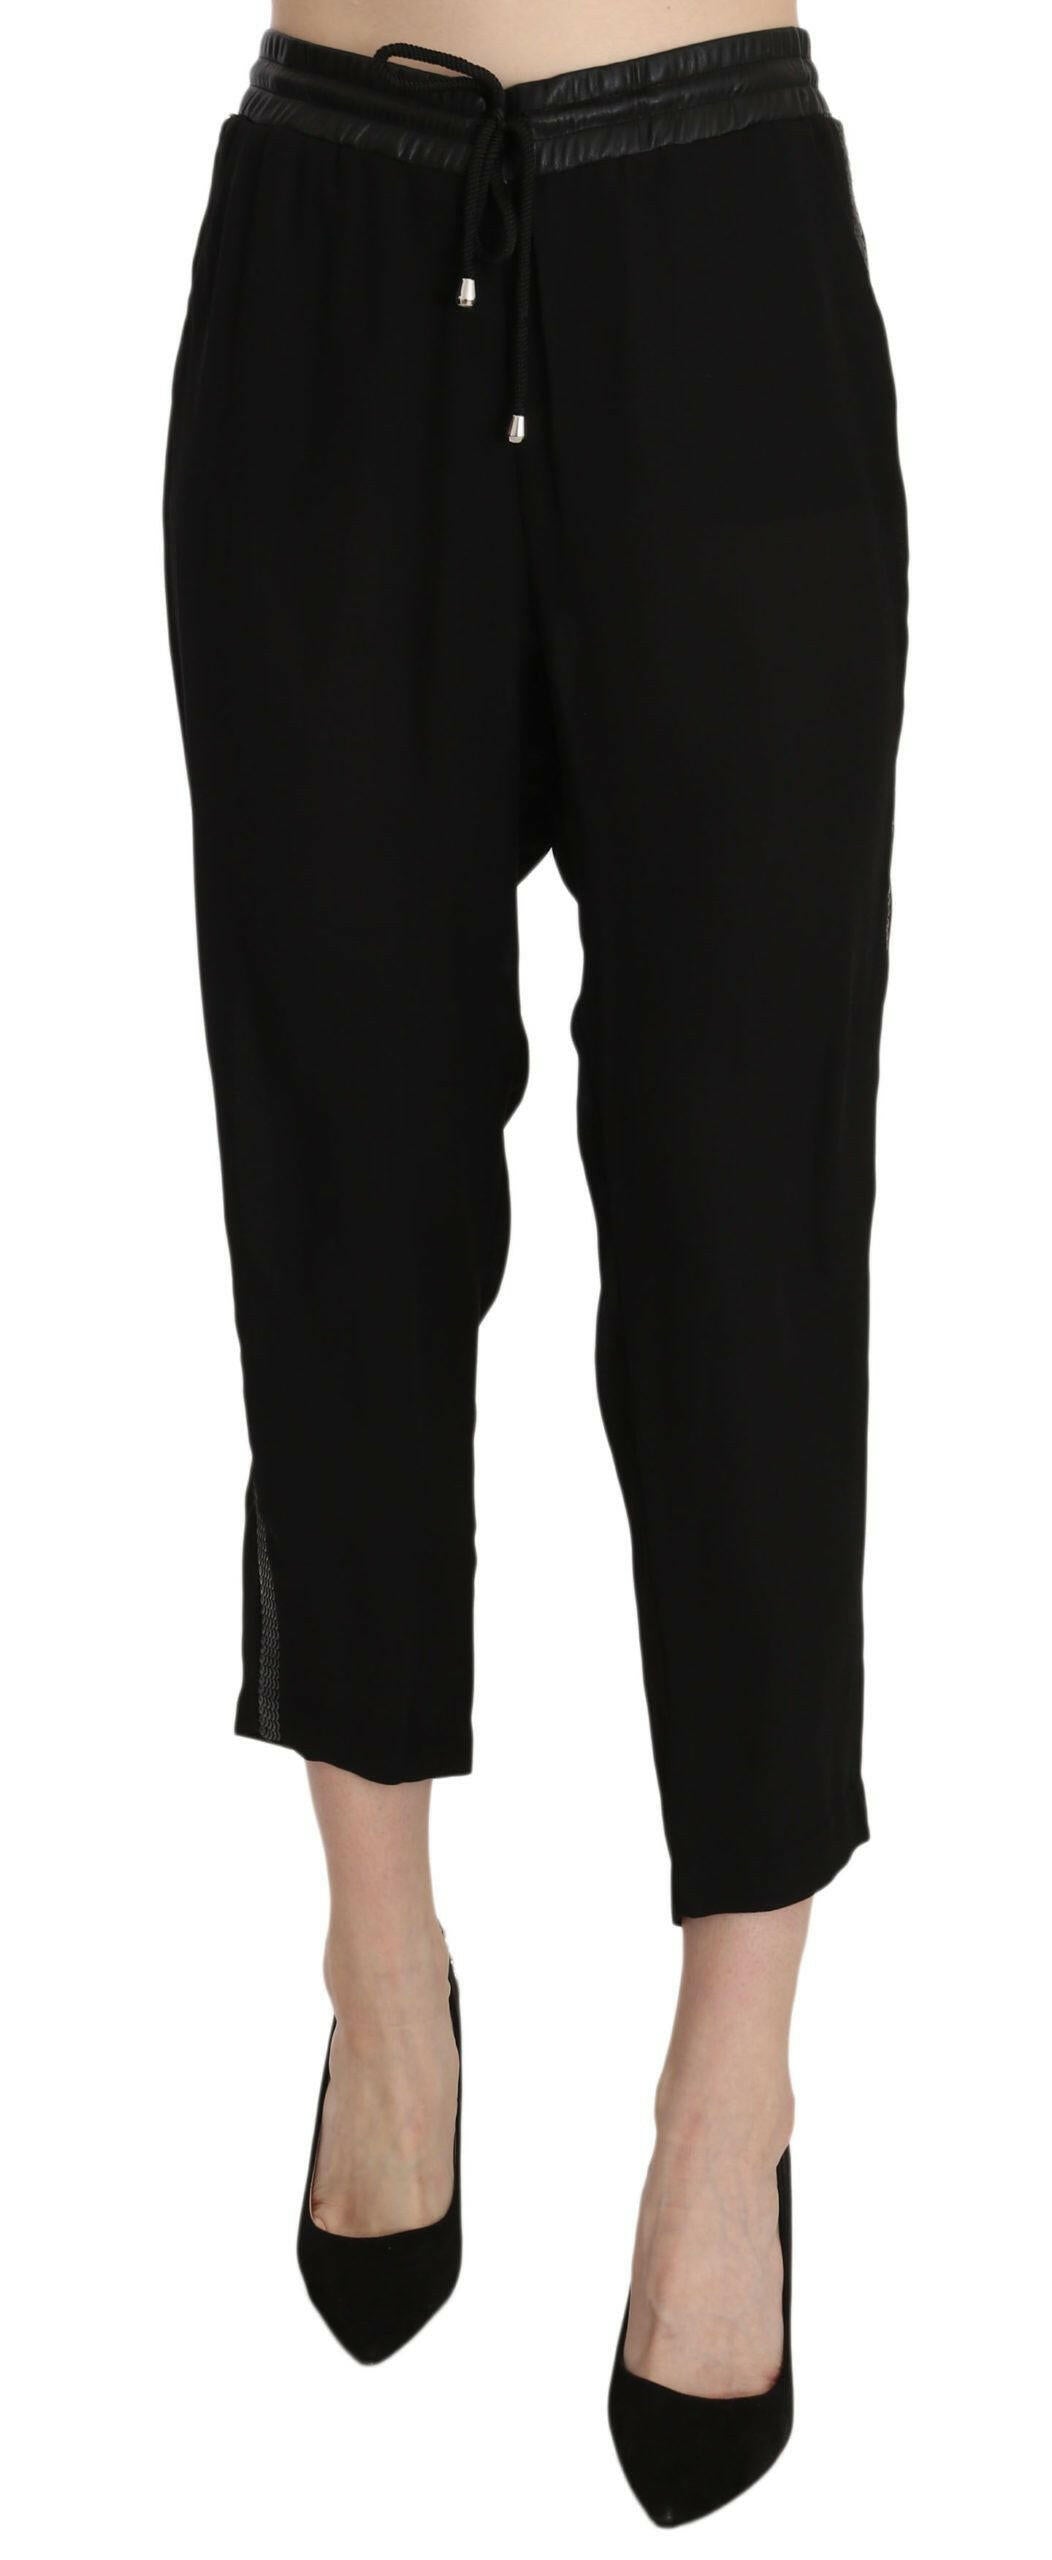 Guess Black Polyester High Waist Cropped Trousers Pants - GENUINE AUTHENTIC BRAND LLC  